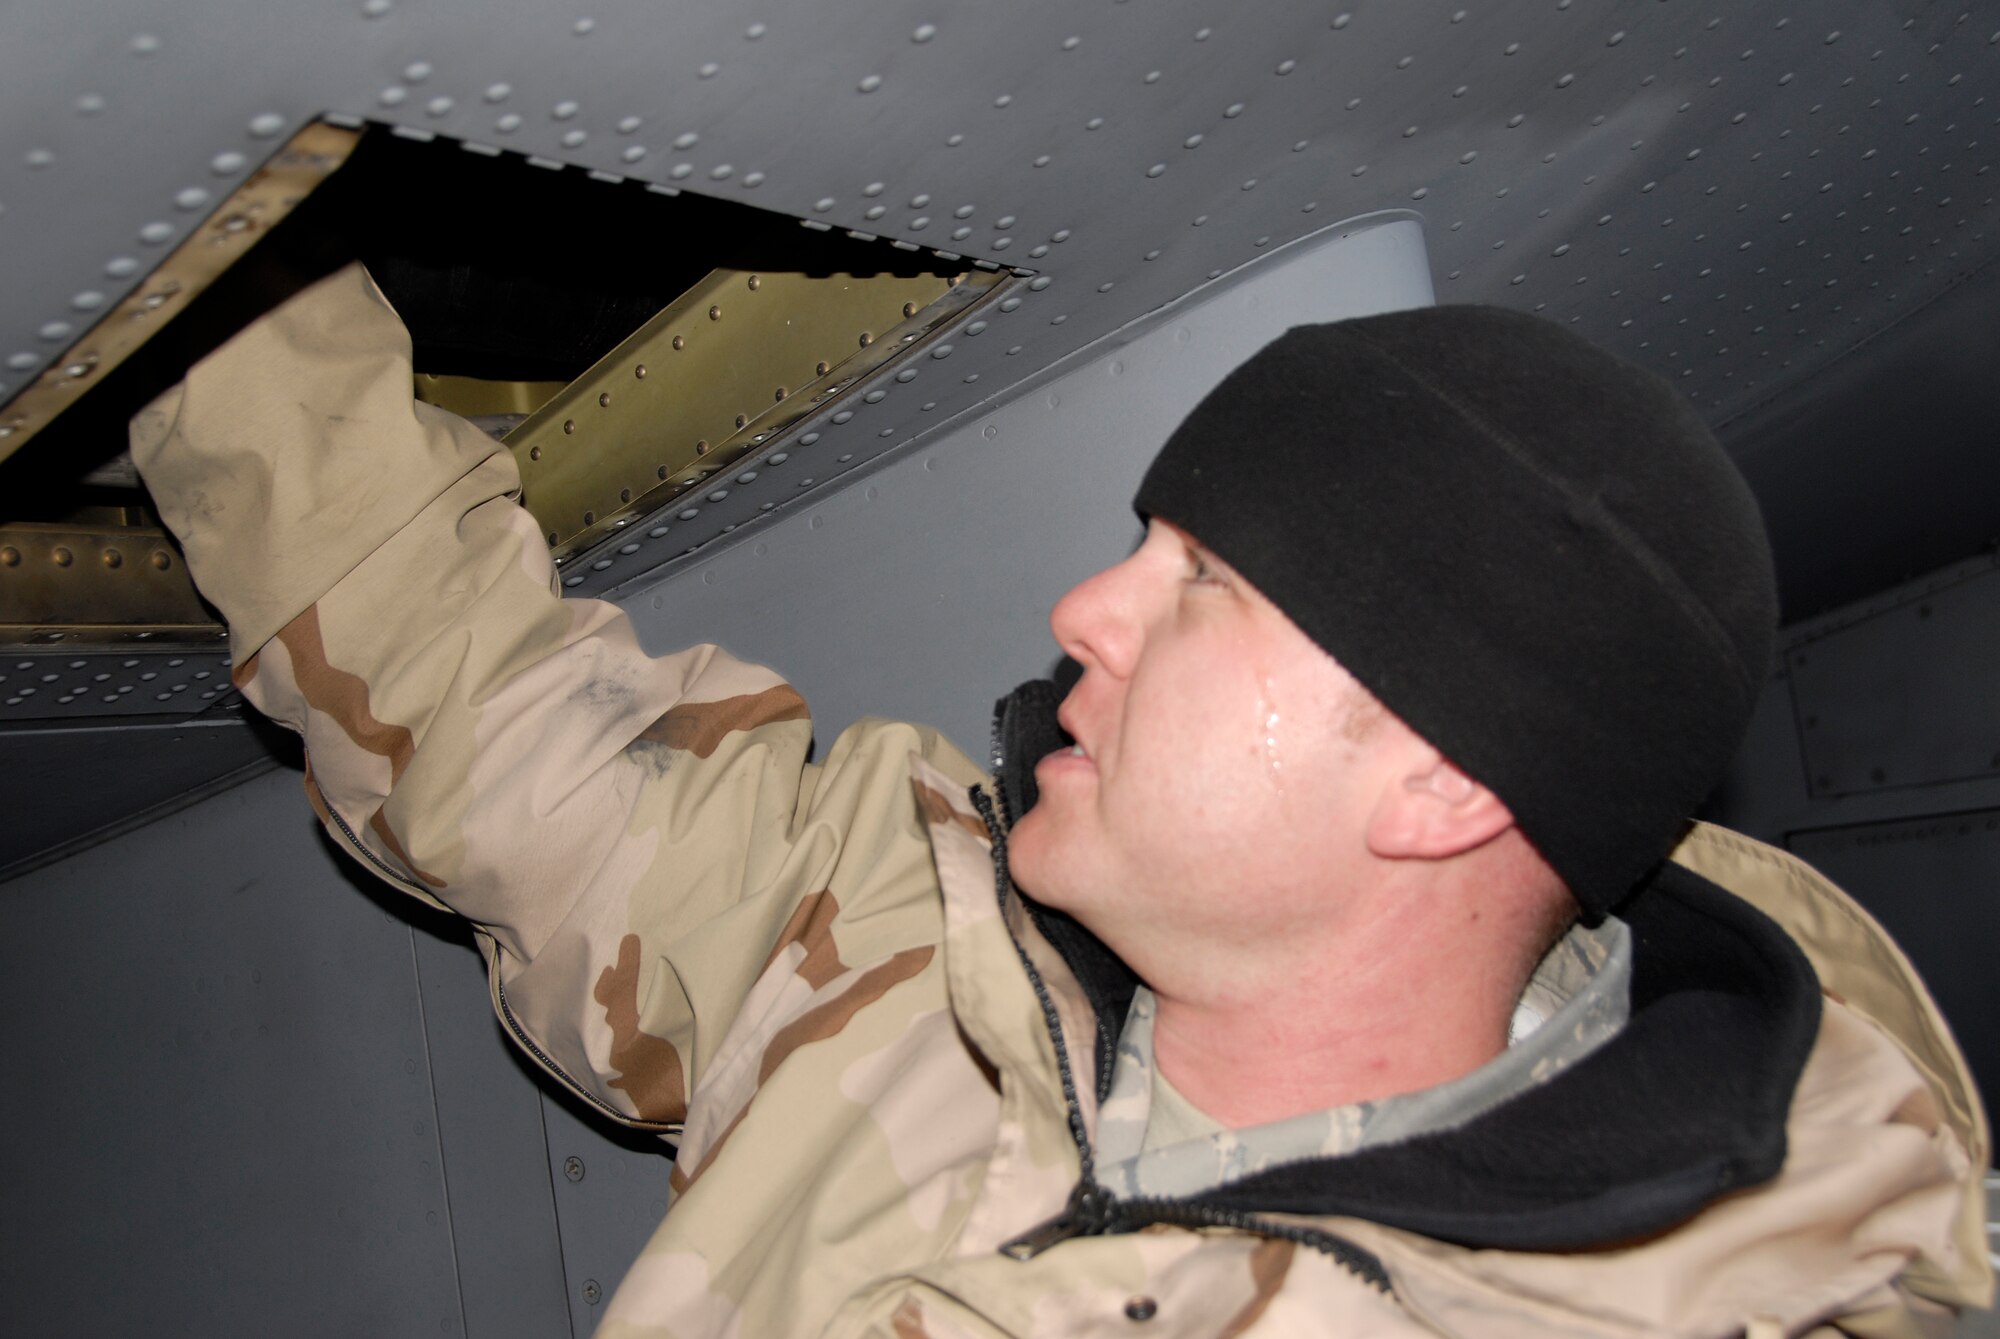 Airmen from the 133rd Airlift Wing work to install a part on a C-130 H3 in Canada. Technical Sgt. Corey Redder, 133rd Maintenance Squadron, installs a replacement valve on a C-130 H3 from the Minnesota Air National Guard. Redder and the crew arriving today in Canada are just returning from the combat zone, and they brought the needed part to the Minnesota C-130 crew on their way to Afghanistan.